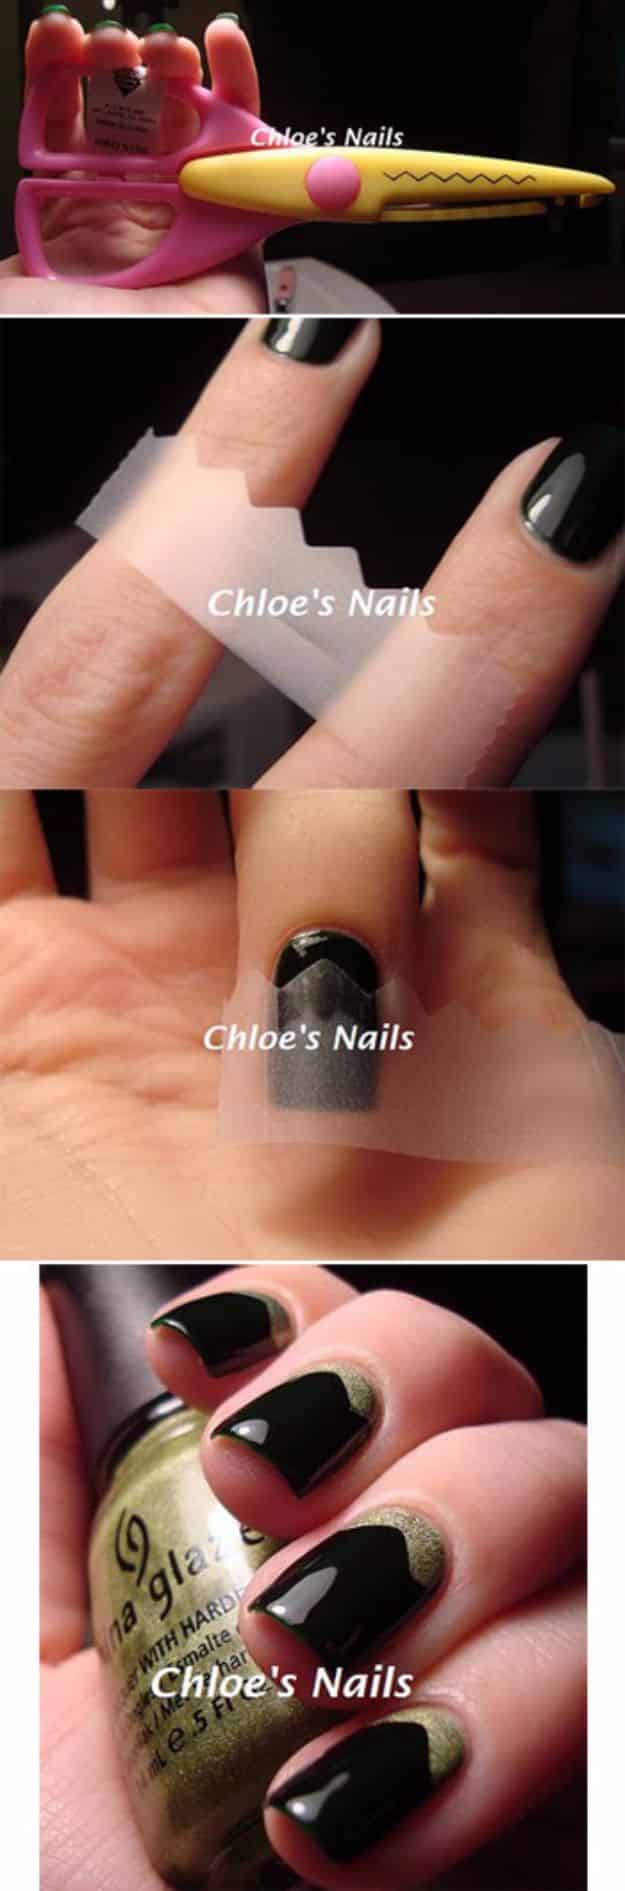 Easy Ways to Paint Nails - Scalloped Nails Using Shearing Scissors - Quick Tips and Tricks for Manicures at Home - Nail Designs and Art Ideas for Simple DIY Pedicures and Manicure at Home - Hacks and Tutorials with Cool Step by Step Instructions and Tutorials - DIY Projects and Crafts by DIY JOY 